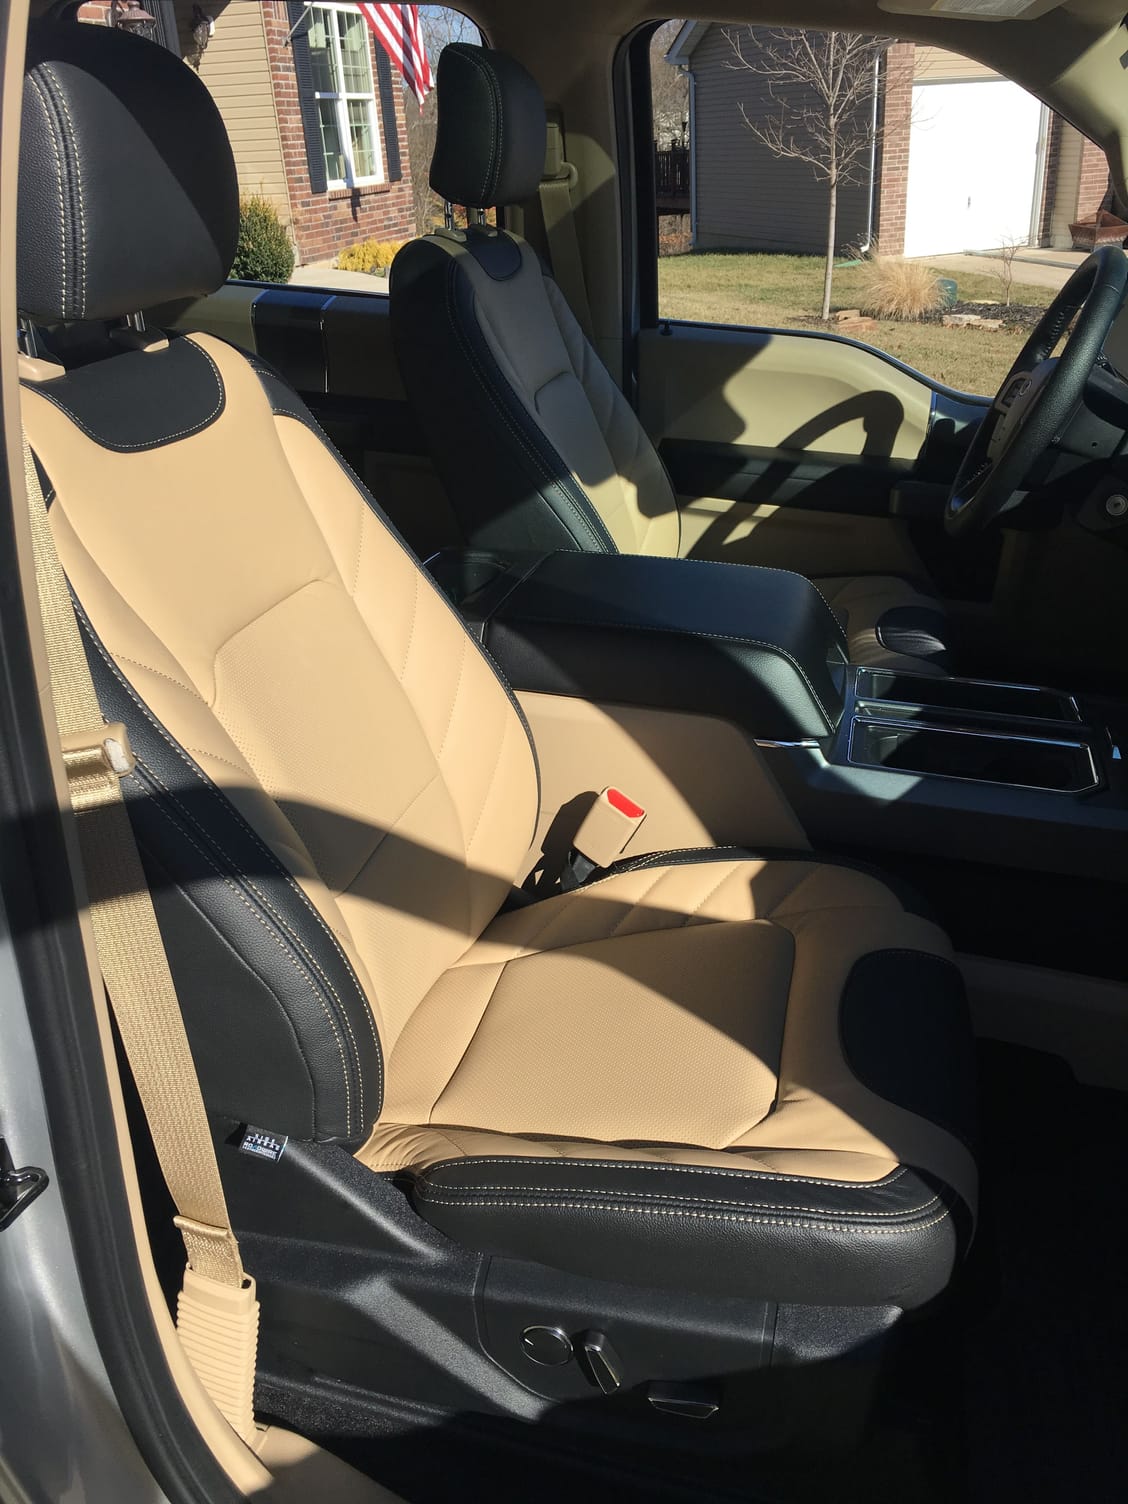 Roadwire Signature Leather Seat Install Ford F150 Forum Community of Ford Truck Fans